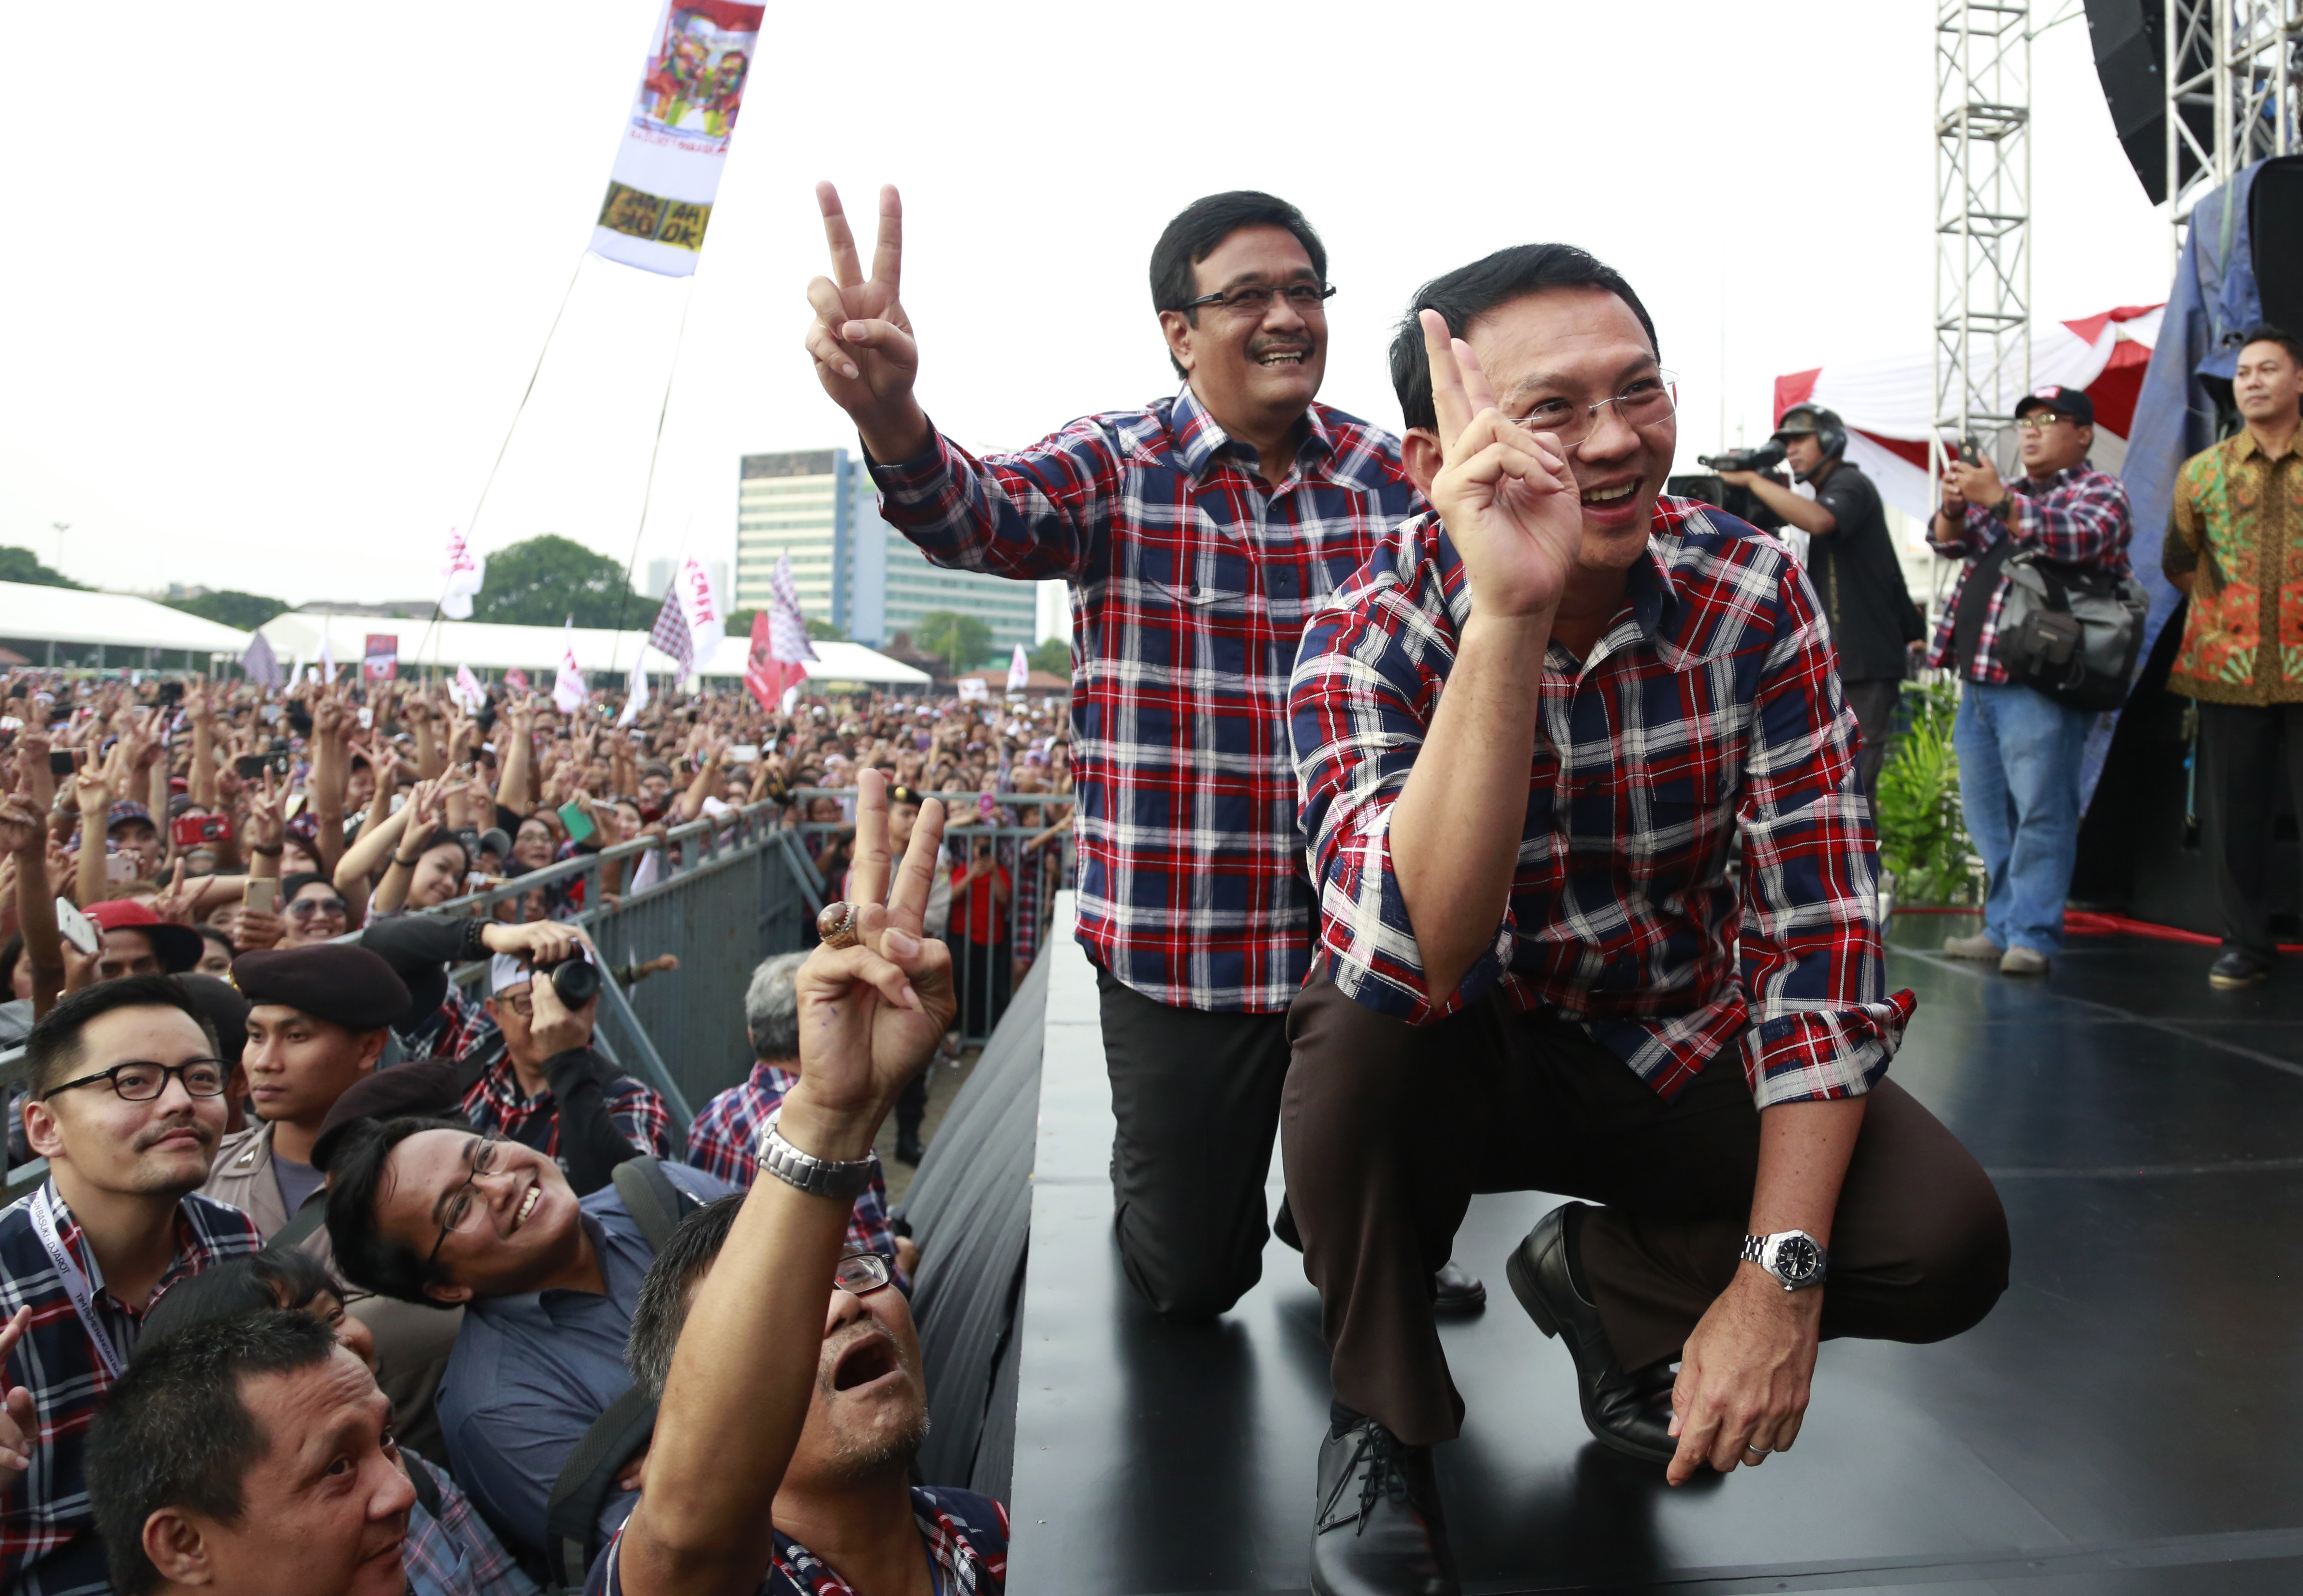 Jakarta Governor Basuki Tjahaja Purnama, also known as Ahok, right, and his deputy and also running mate, Djarot Saiful Hidayat, pose for photographers as they attend a campaign rally in Jakarta on Feb. 11, 2017 (Dita Alangkara—AP)